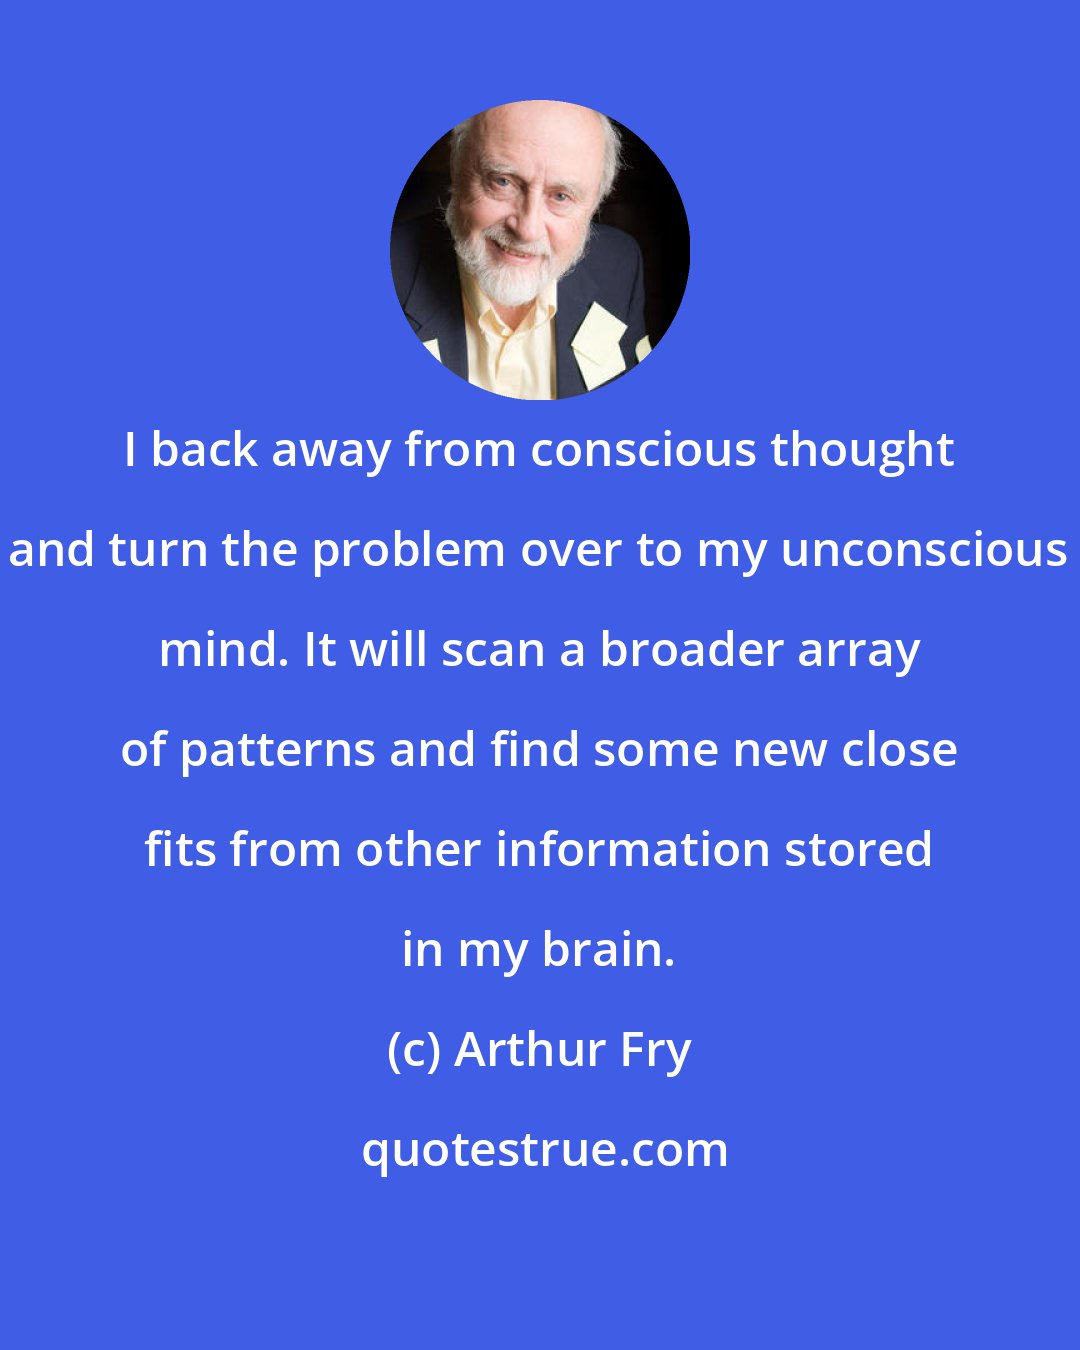 Arthur Fry: I back away from conscious thought and turn the problem over to my unconscious mind. It will scan a broader array of patterns and find some new close fits from other information stored in my brain.